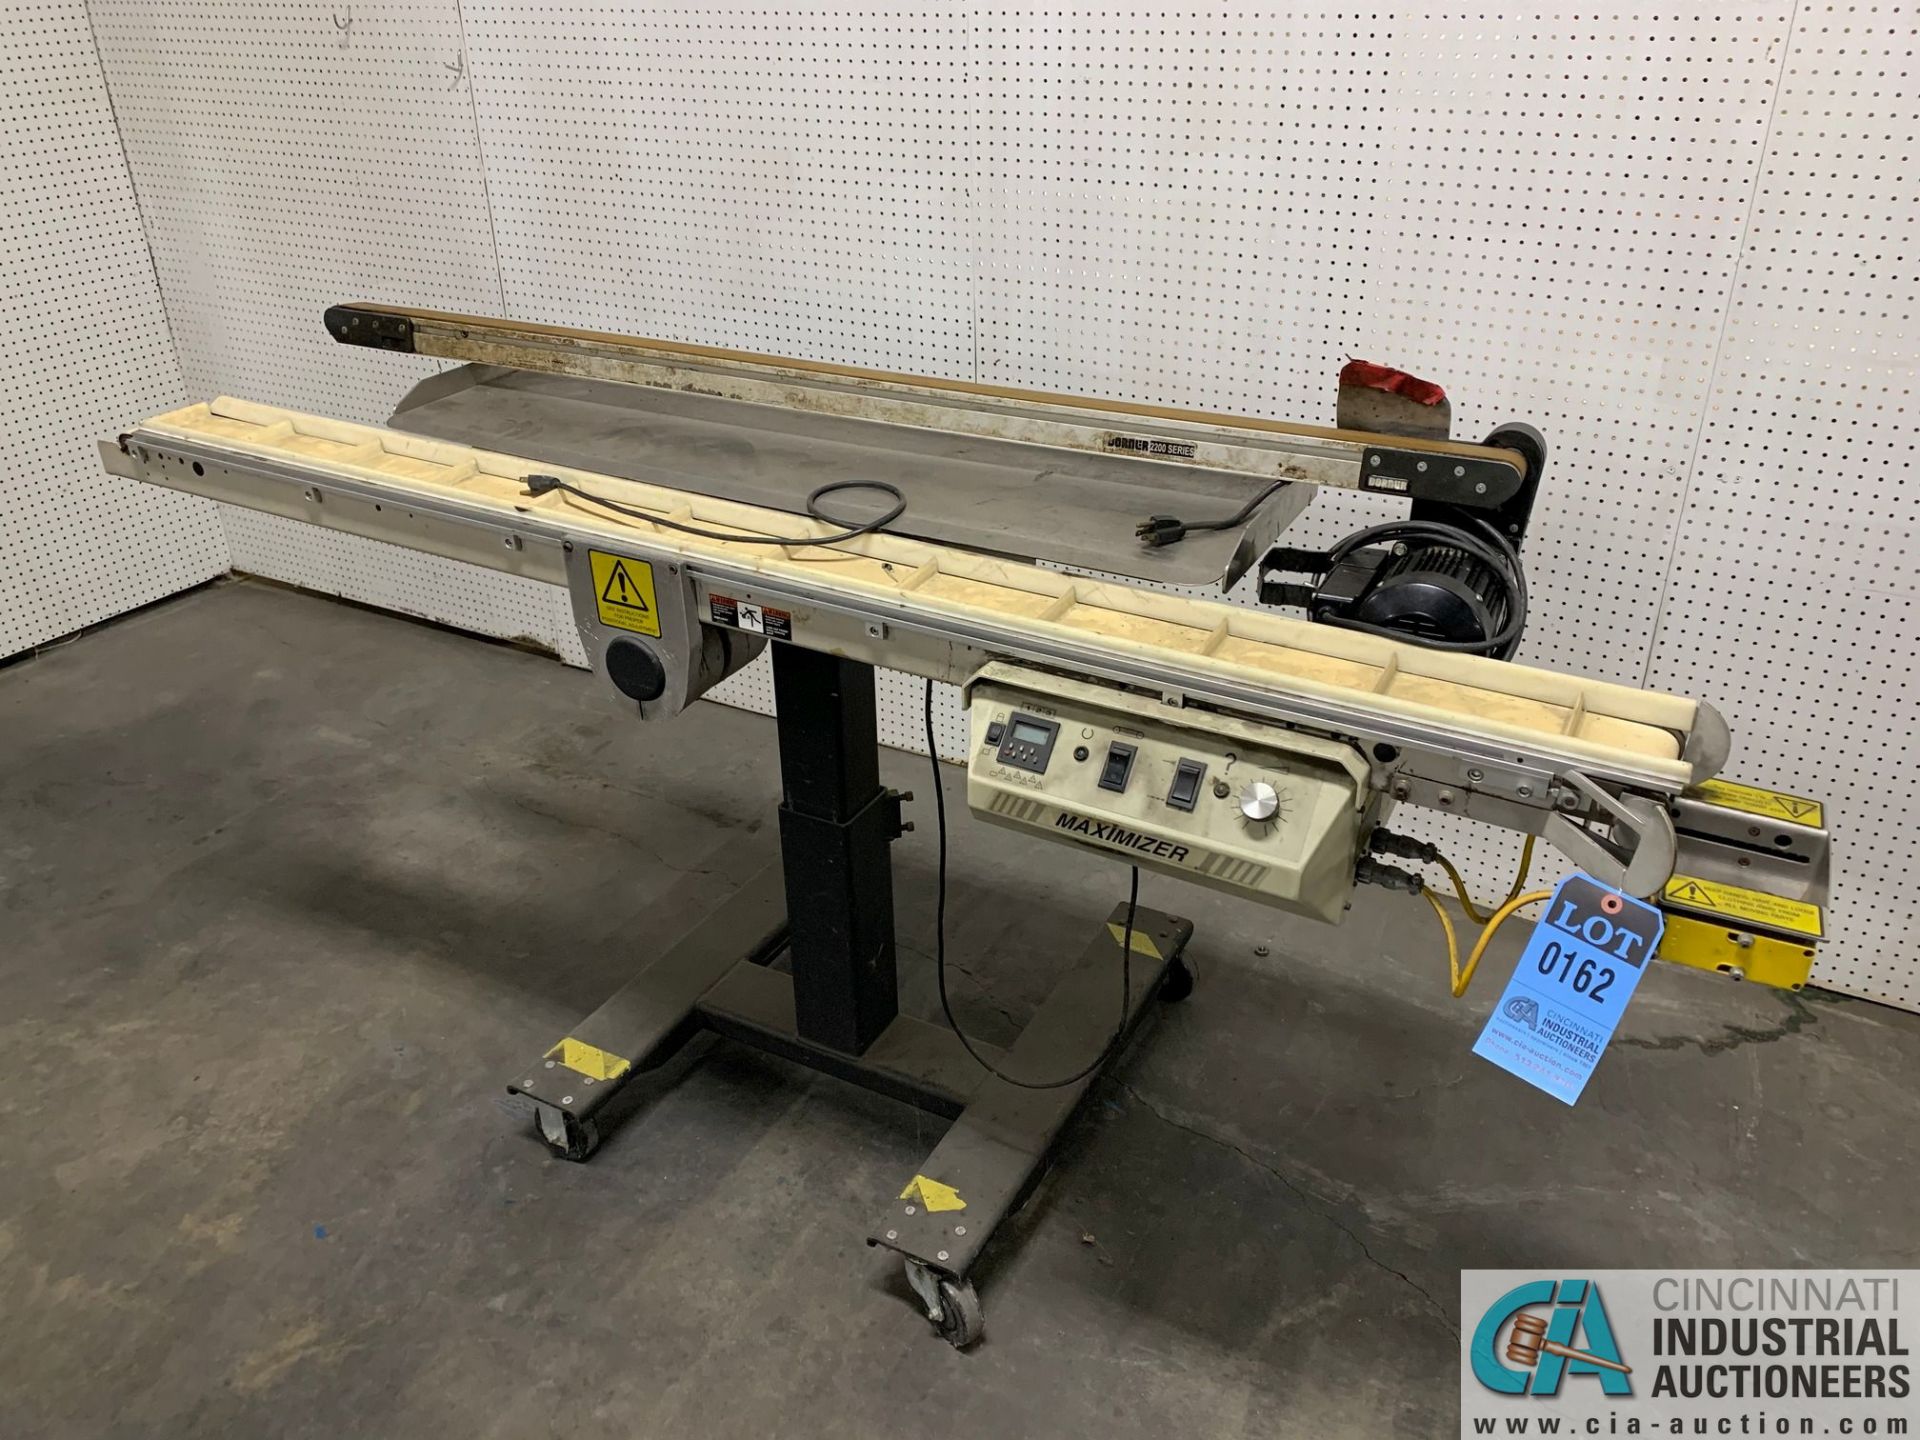 4" WIDE X 72" MAXIMER CLEATED POWER CONVEYOR WITH DORNER 2200 SERIES 1-1/2" X 60" CONVEYOR